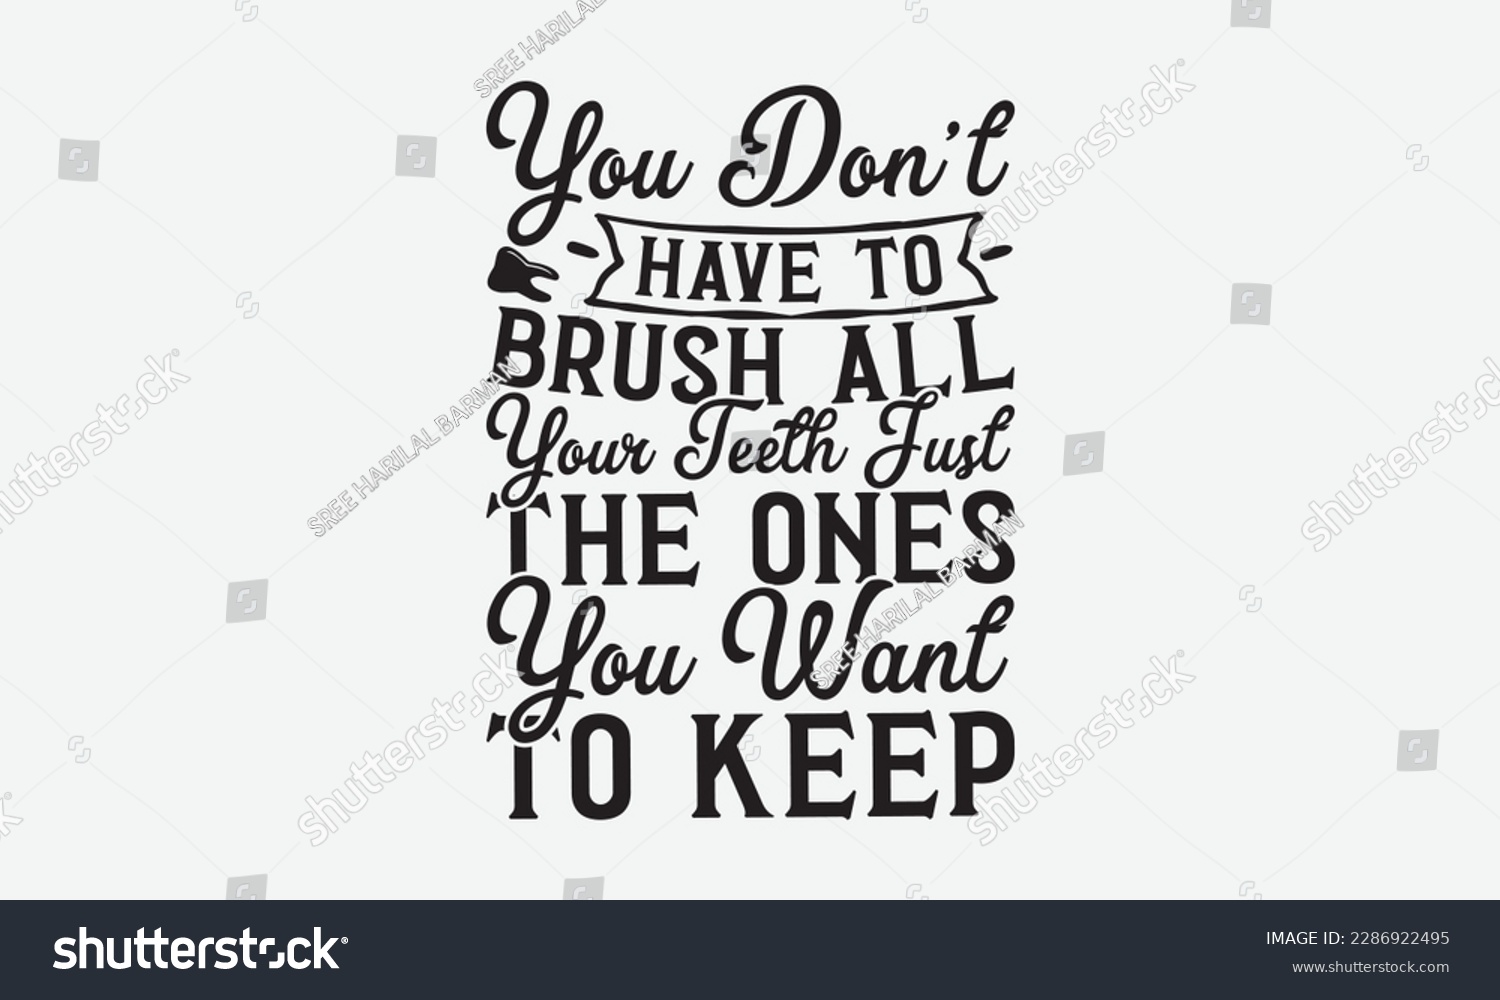 SVG of You Don’t Have To Brush All Your Teeth Just The Ones You Want To Keep - Dentist T-shirt Design, Conceptual handwritten phrase craft SVG hand-lettered, Handmade calligraphy vector illustration, templat svg